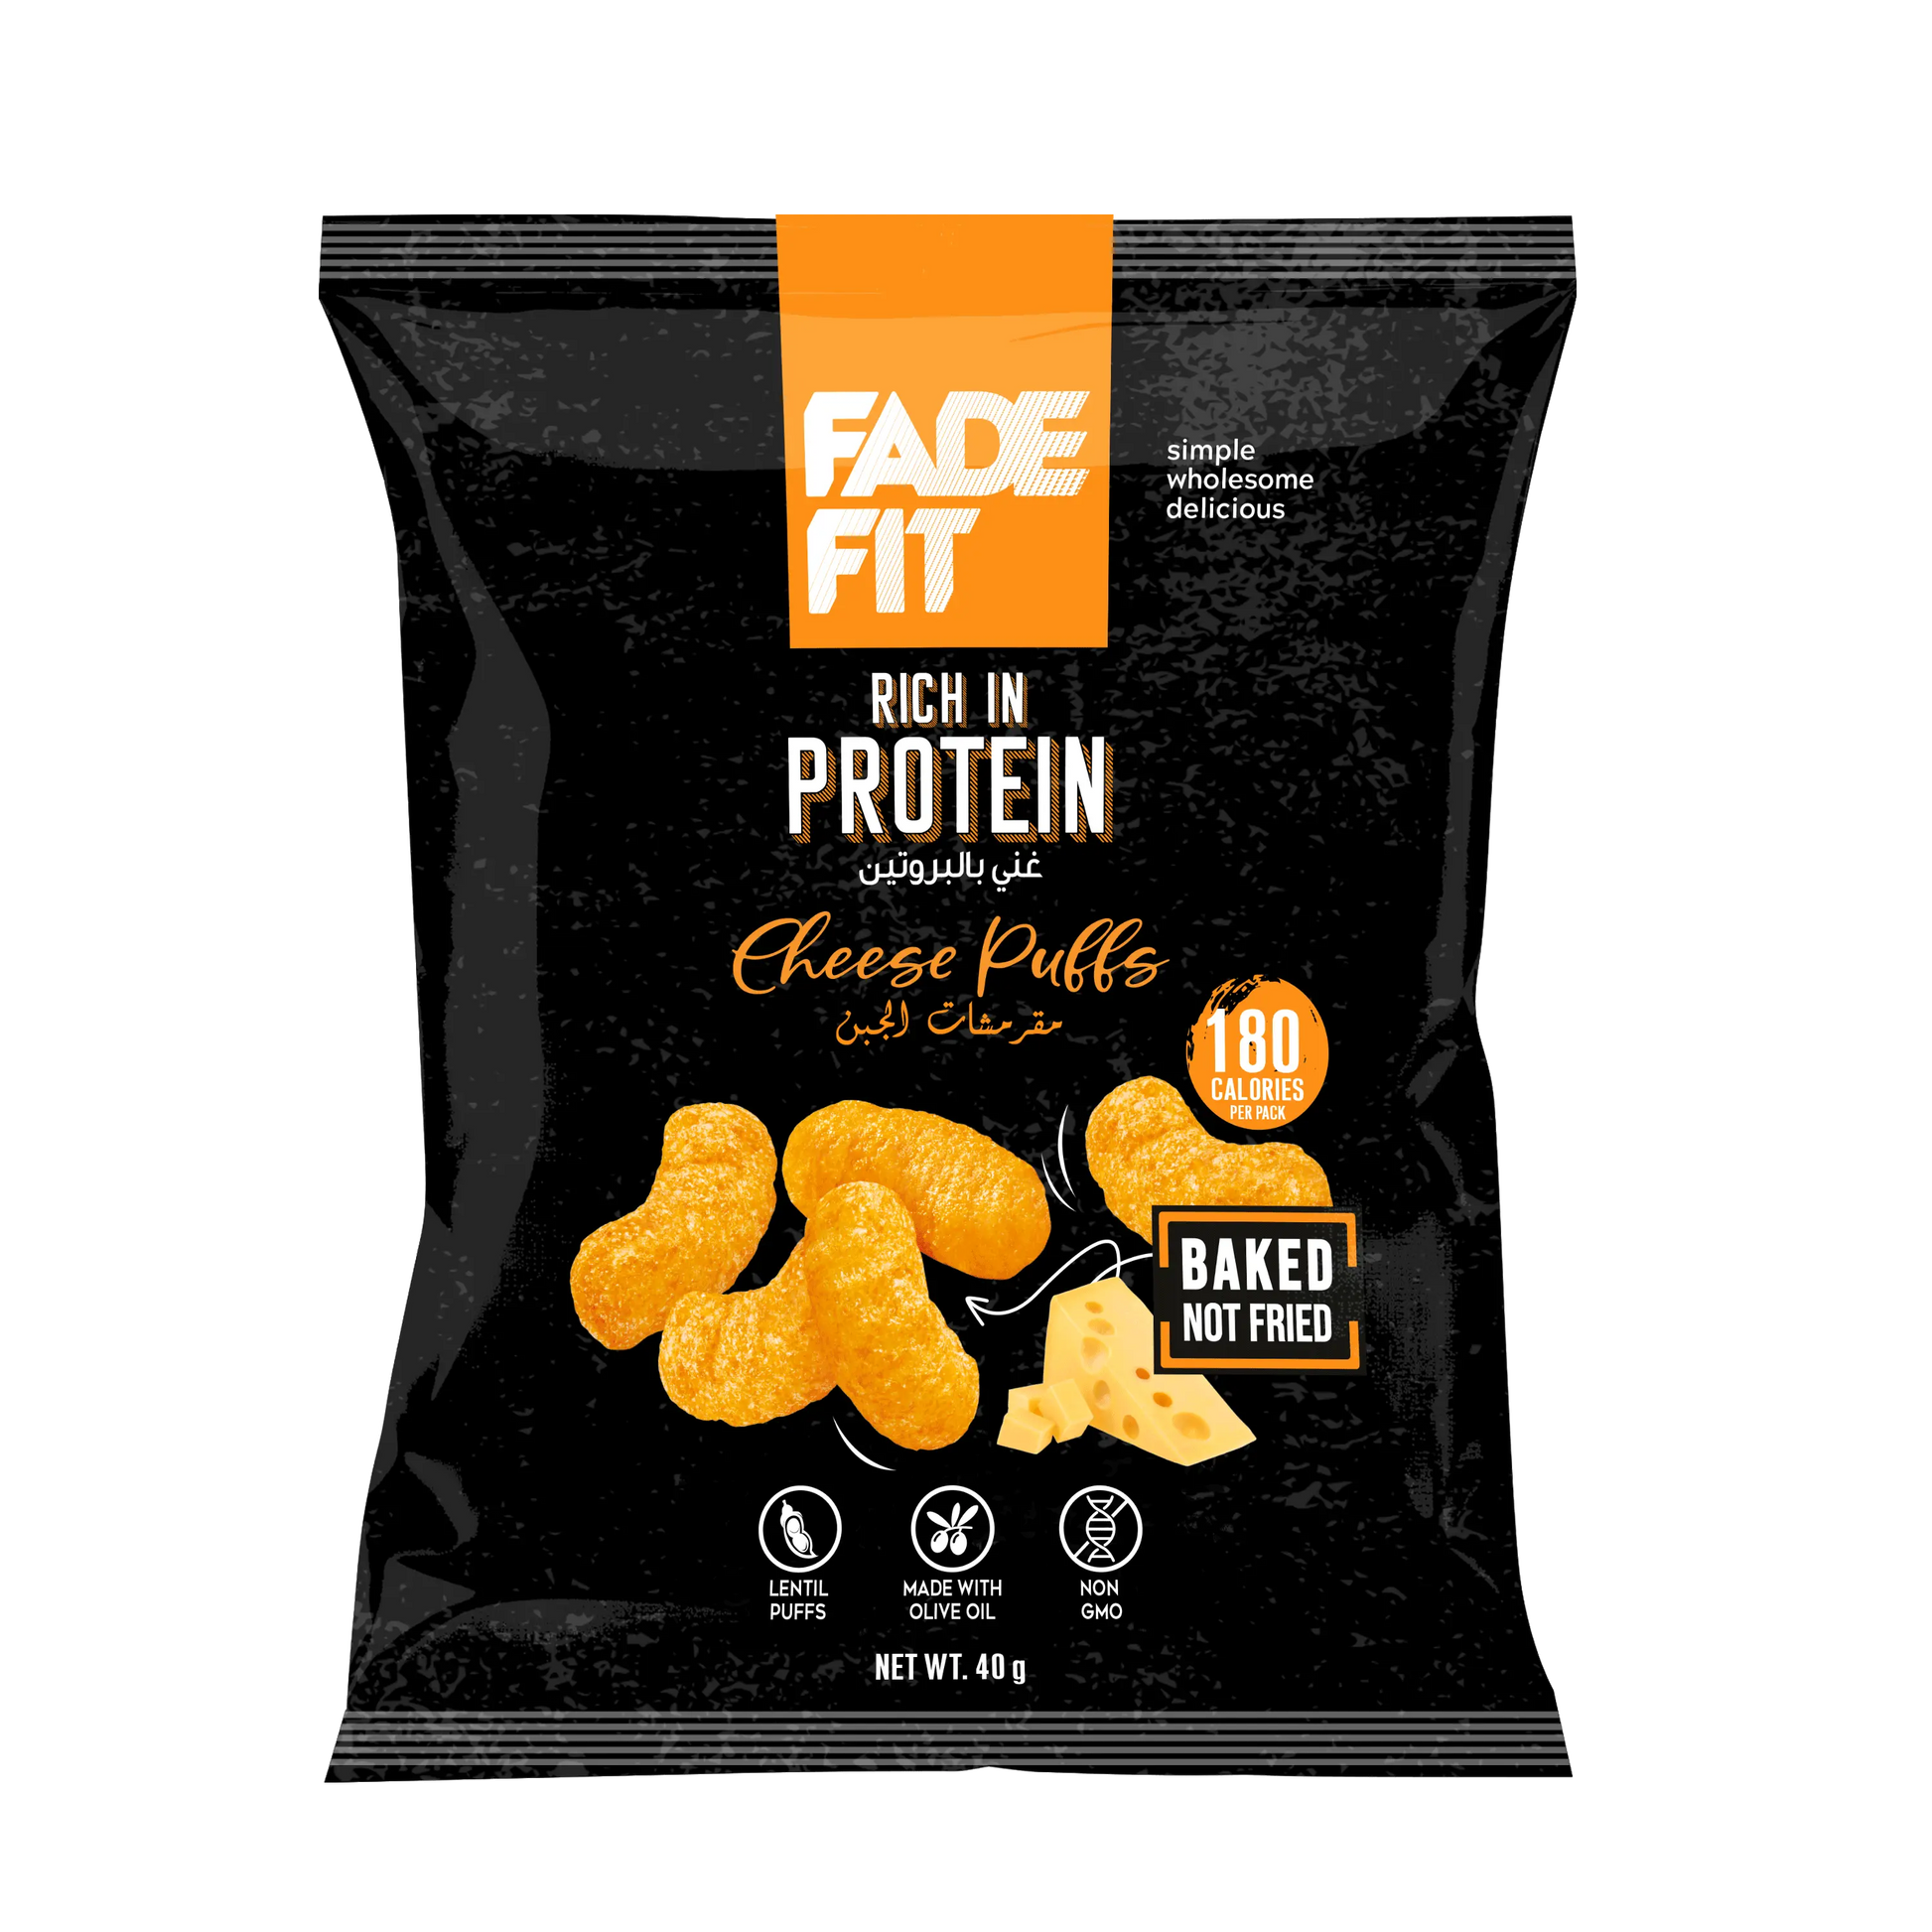 Fade Fit - Cheese Puffs , Rich in Protein, Baked, NON GMO 40gm Fade Fit